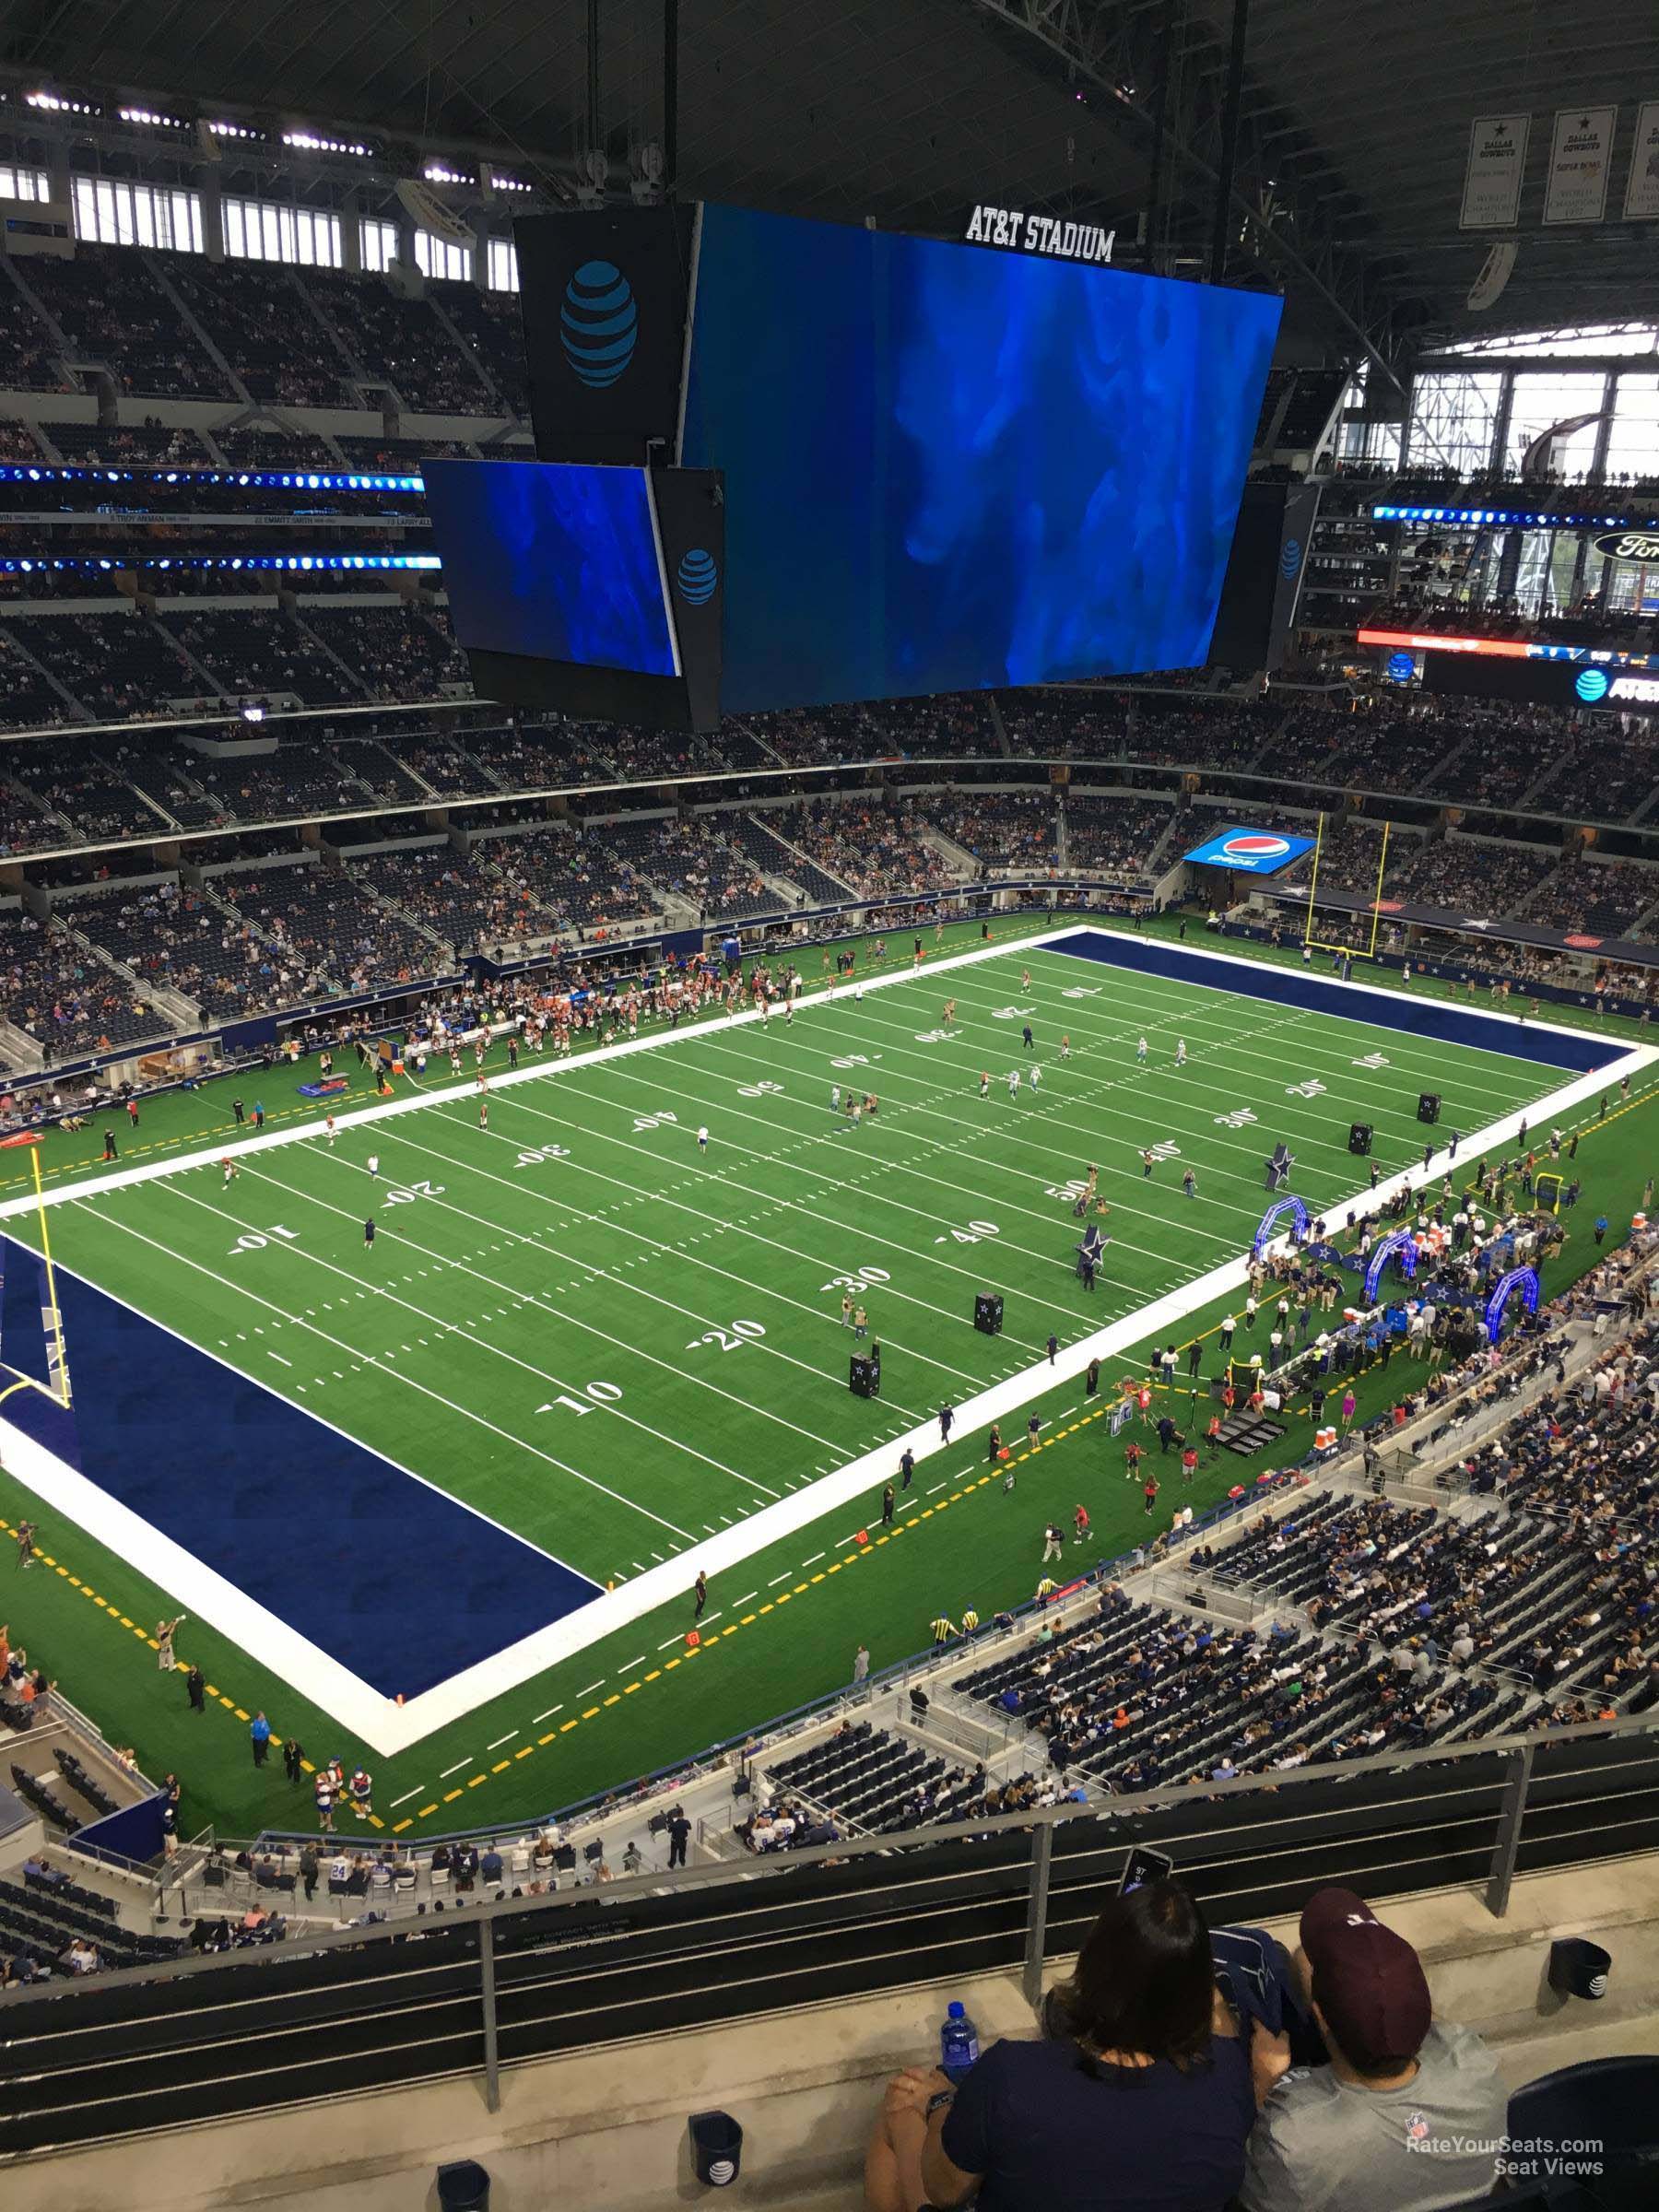 section 421, row 4 seat view  for football - at&t stadium (cowboys stadium)